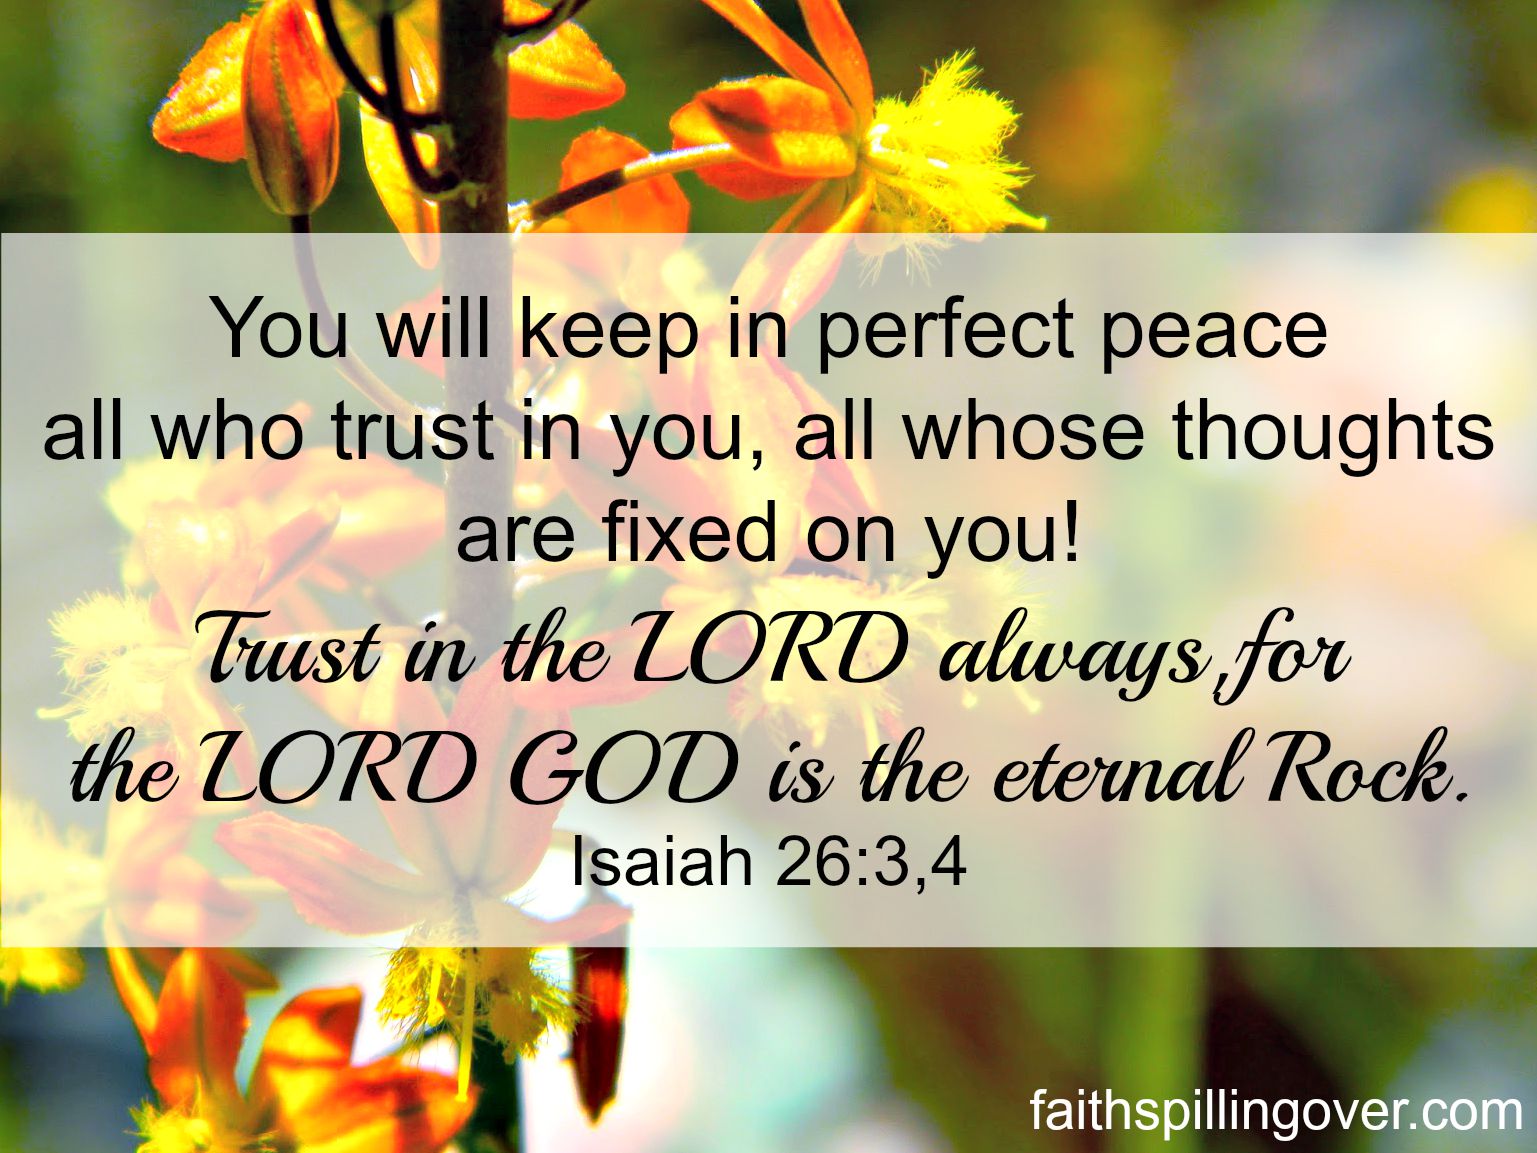 You will keep in perfect peace